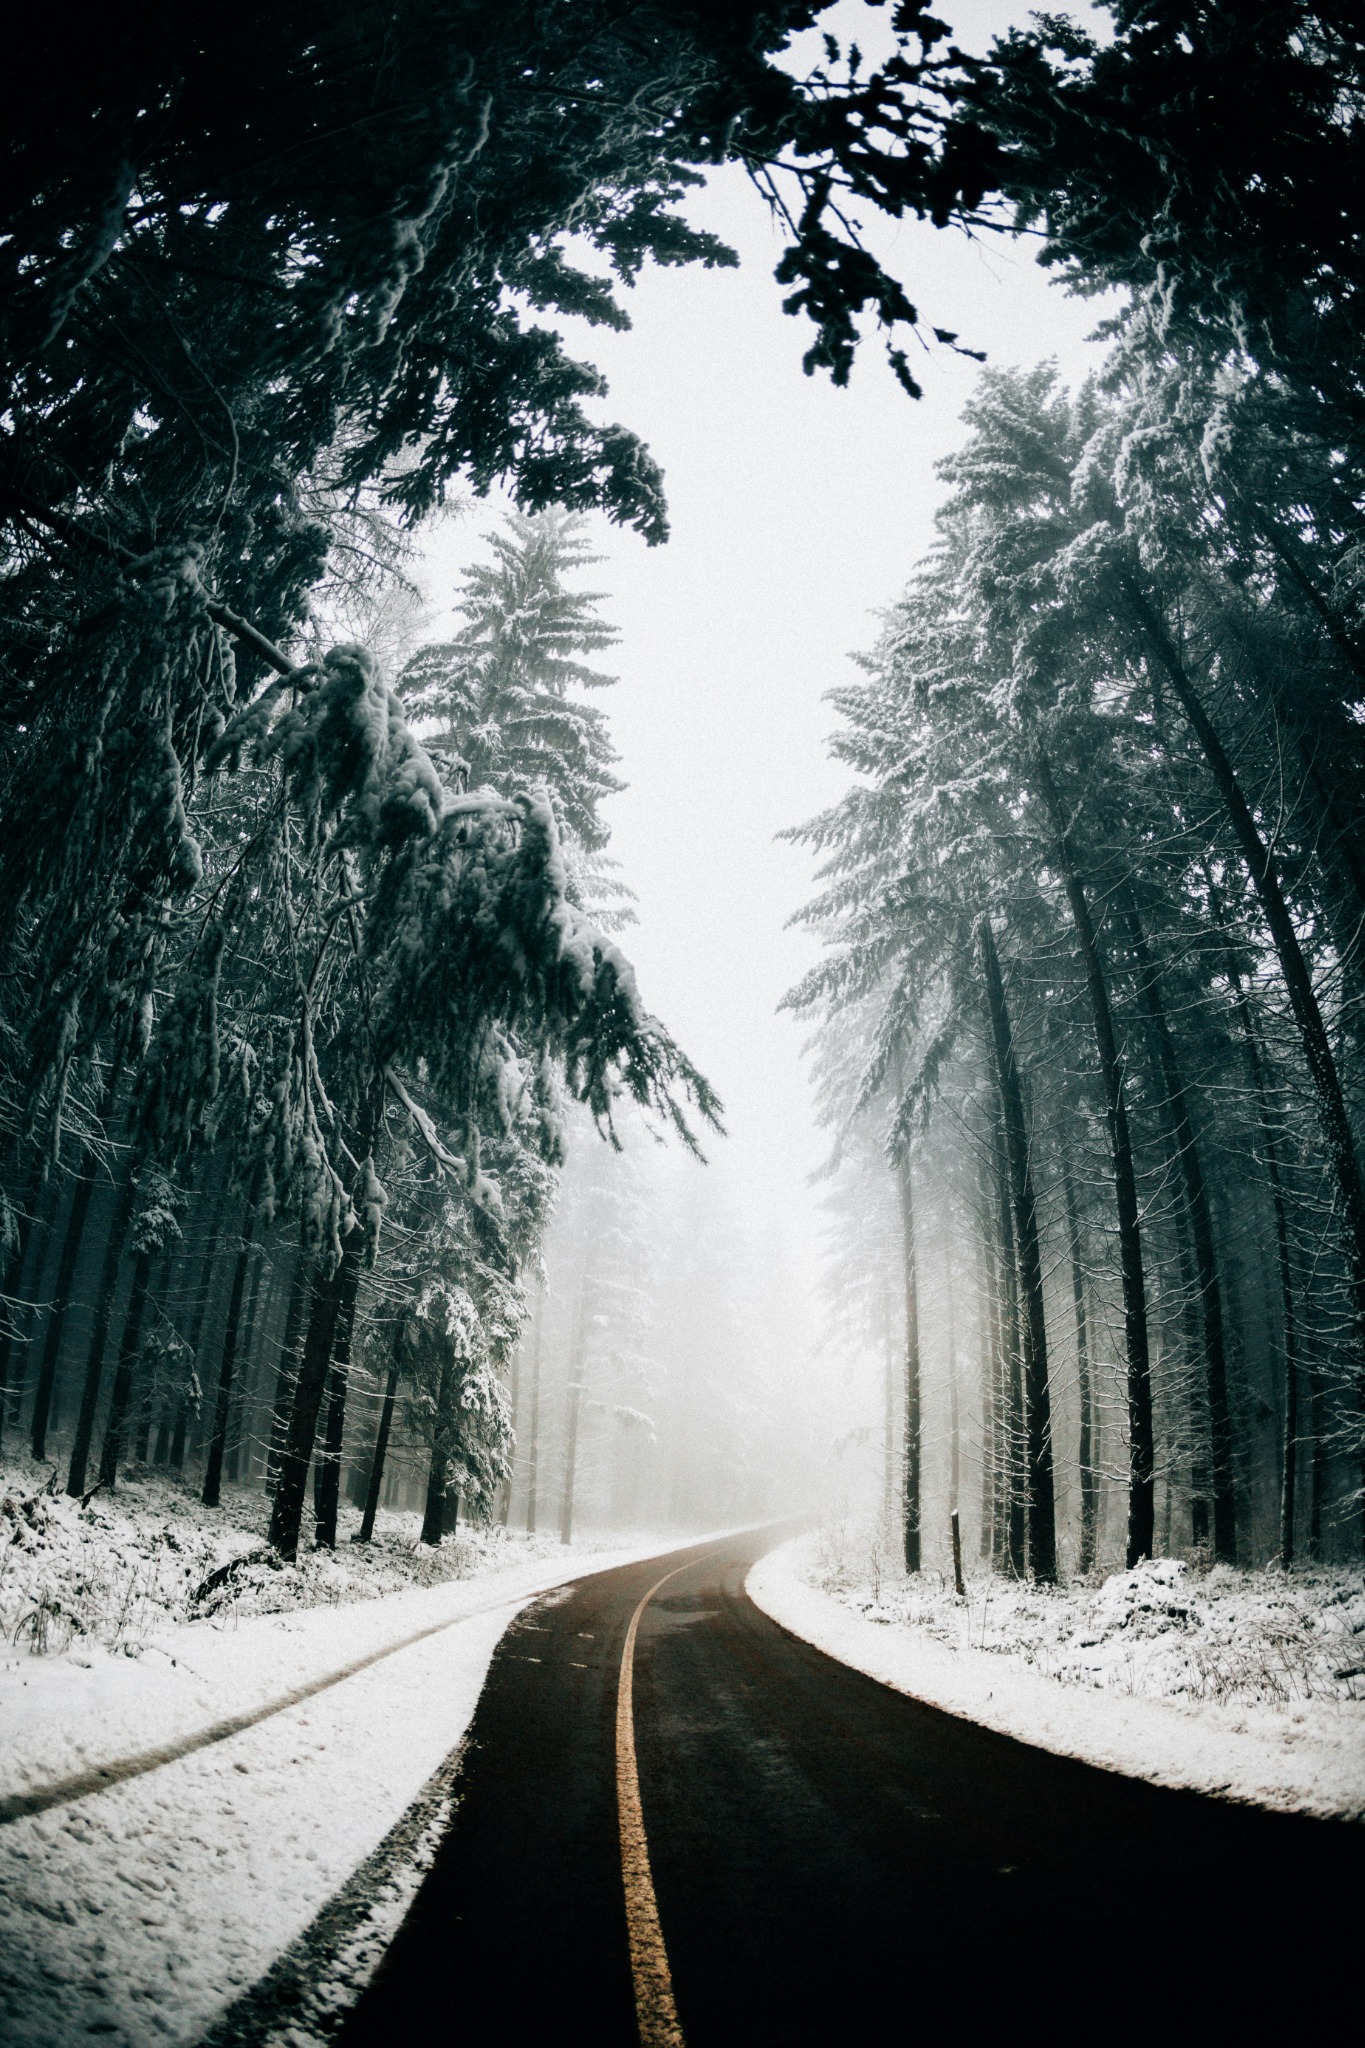 Misty snowy forest road